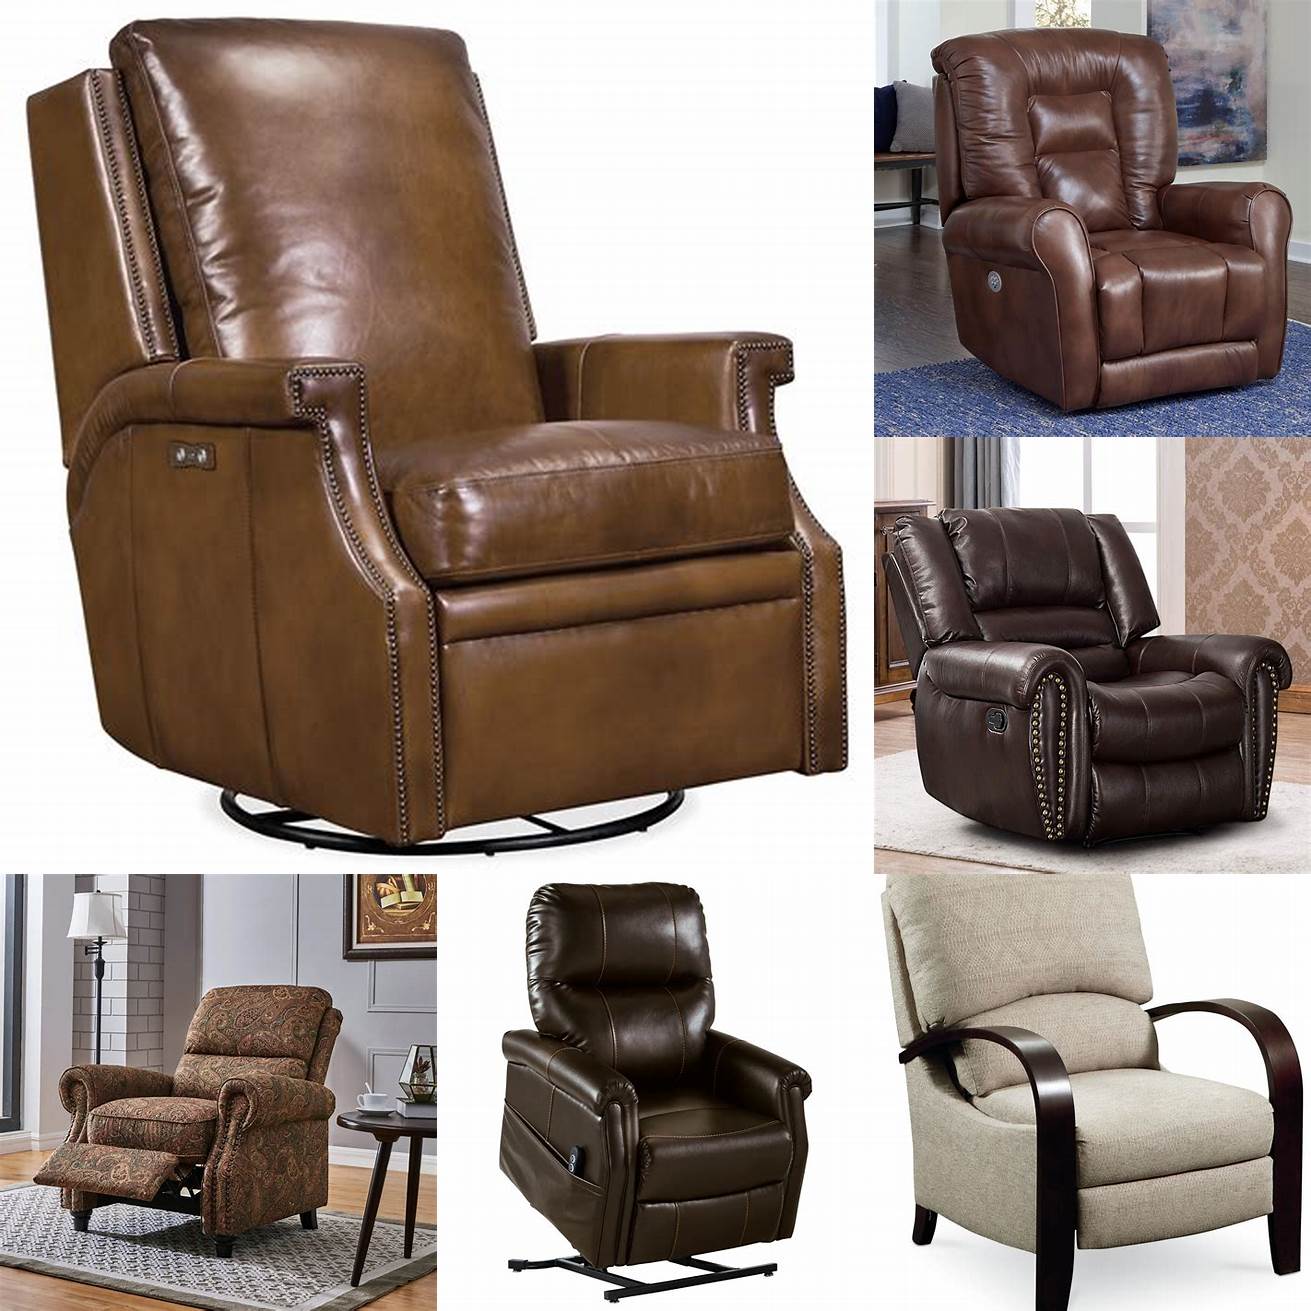 Chairs and Recliners